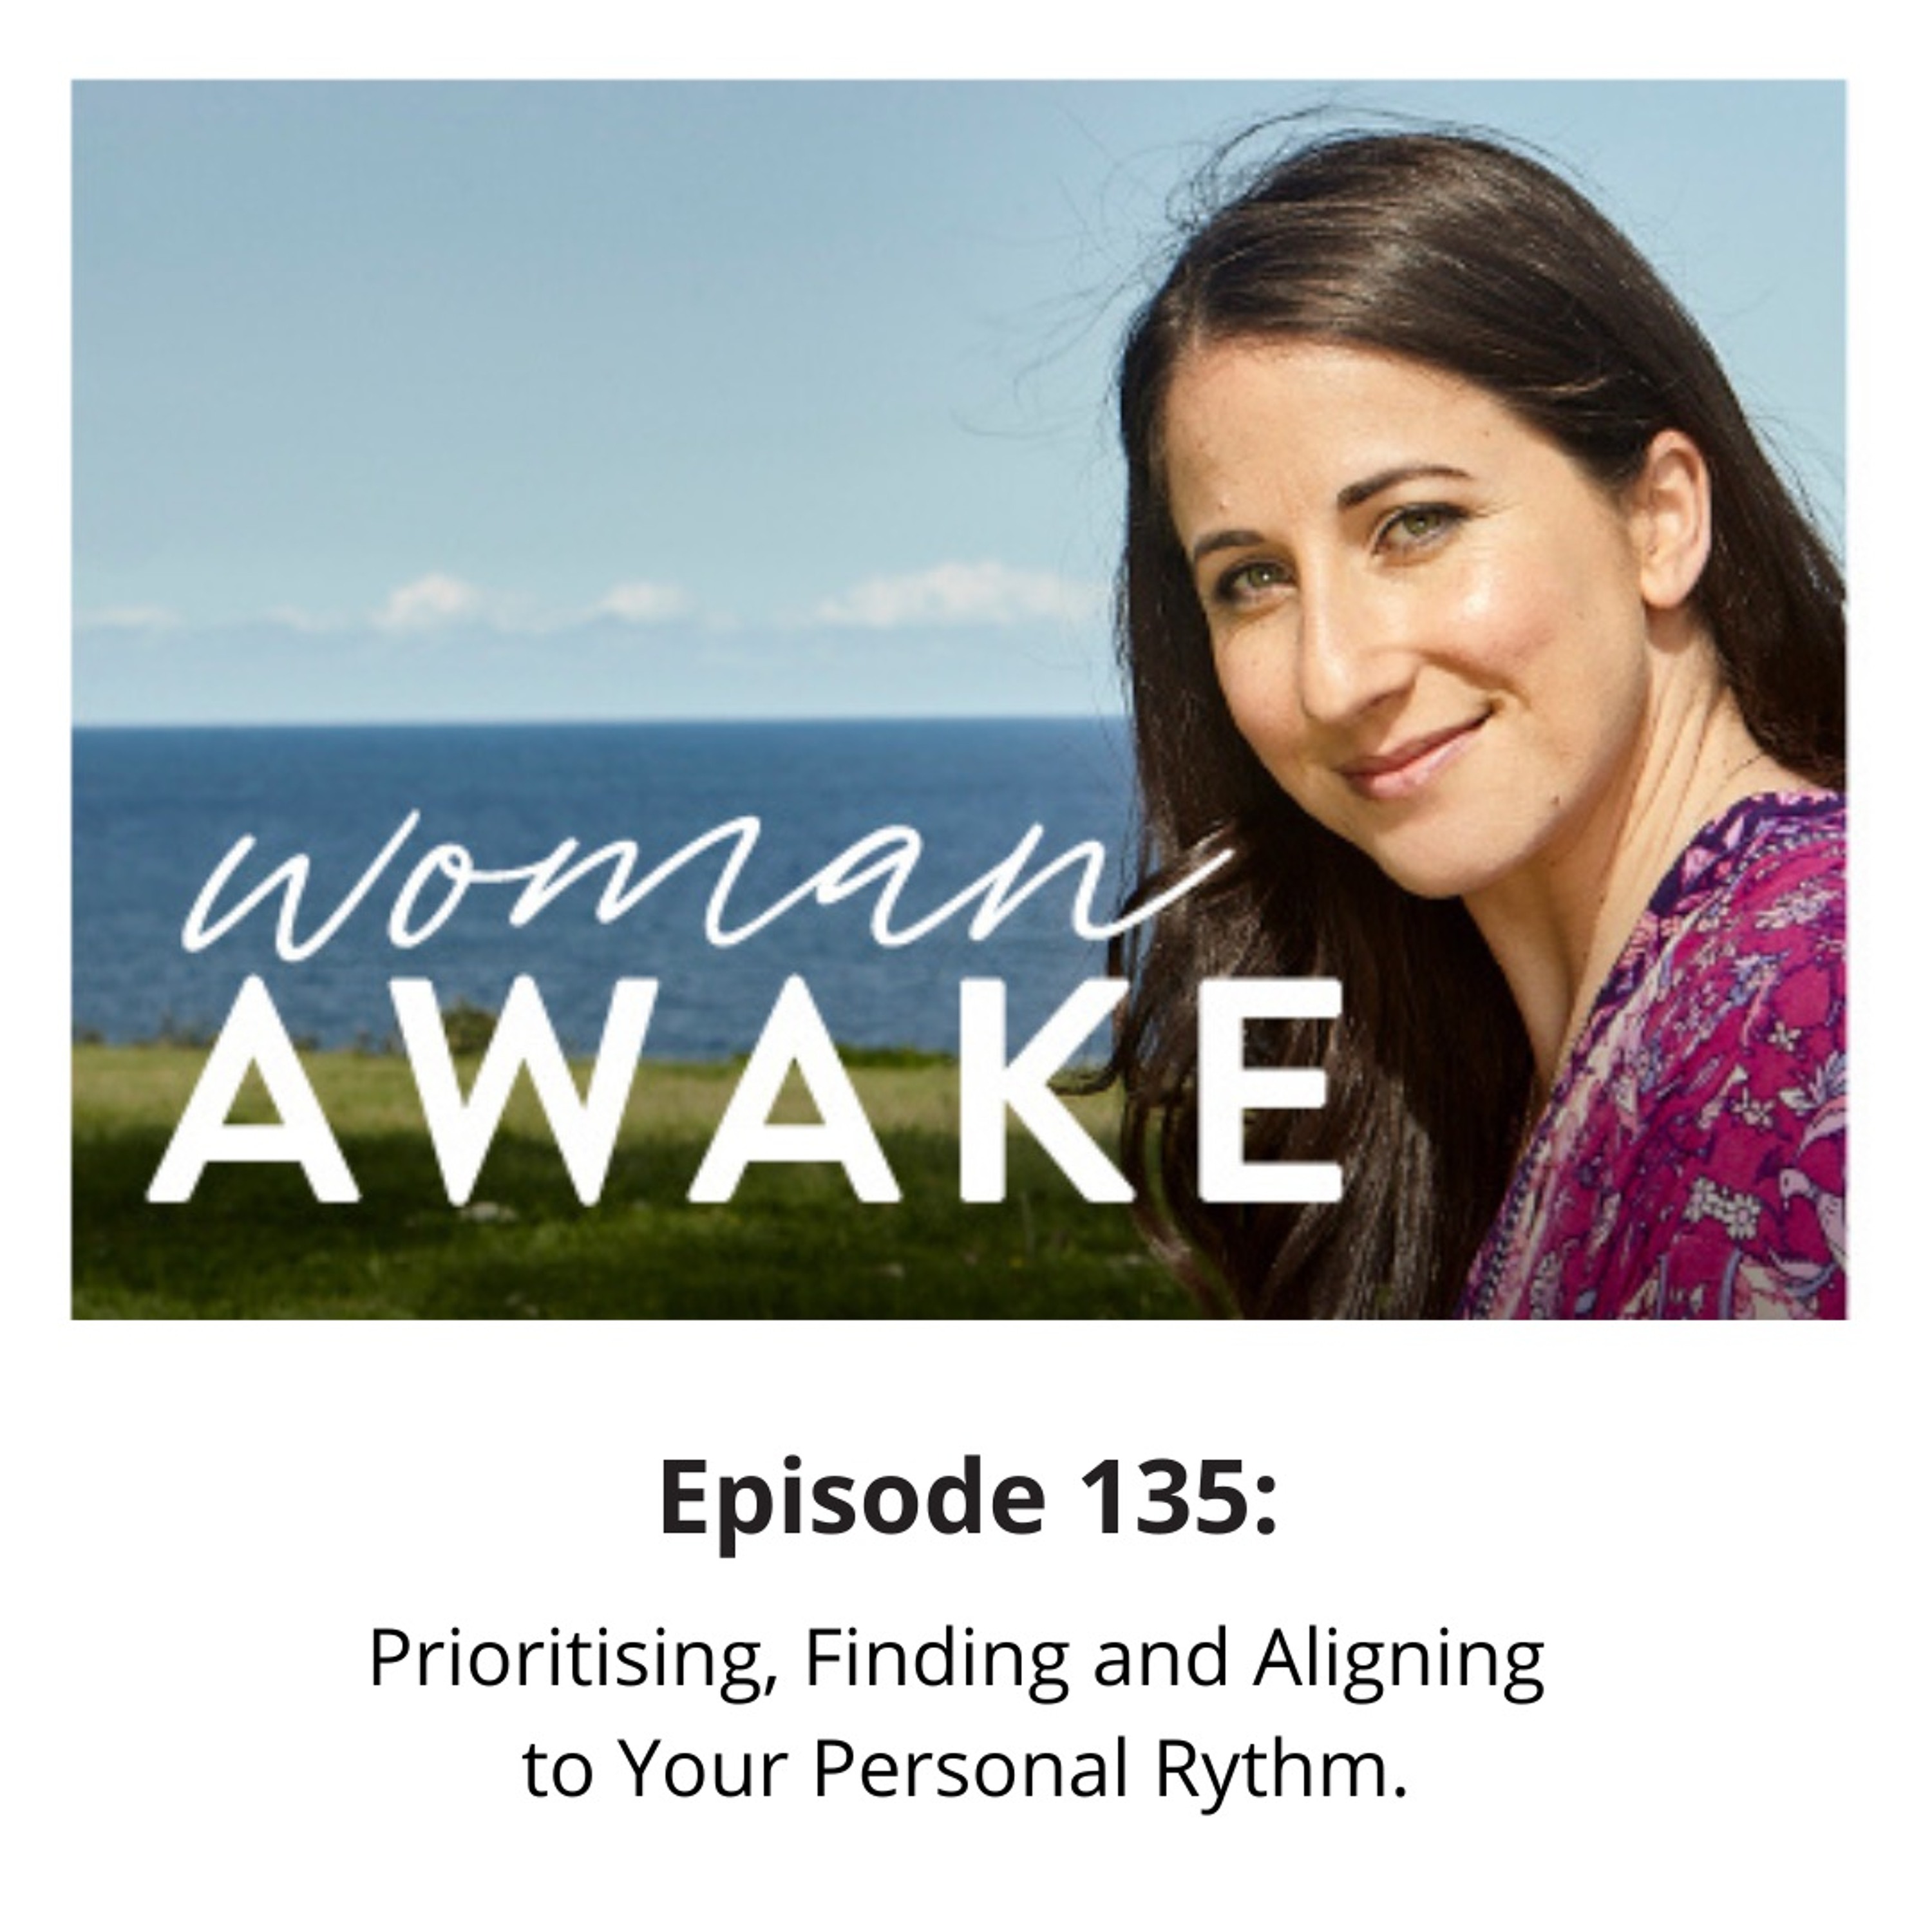 Woman Awake Episode 135 Prioritising, Finding and Aligning to Your Personal Rhythm